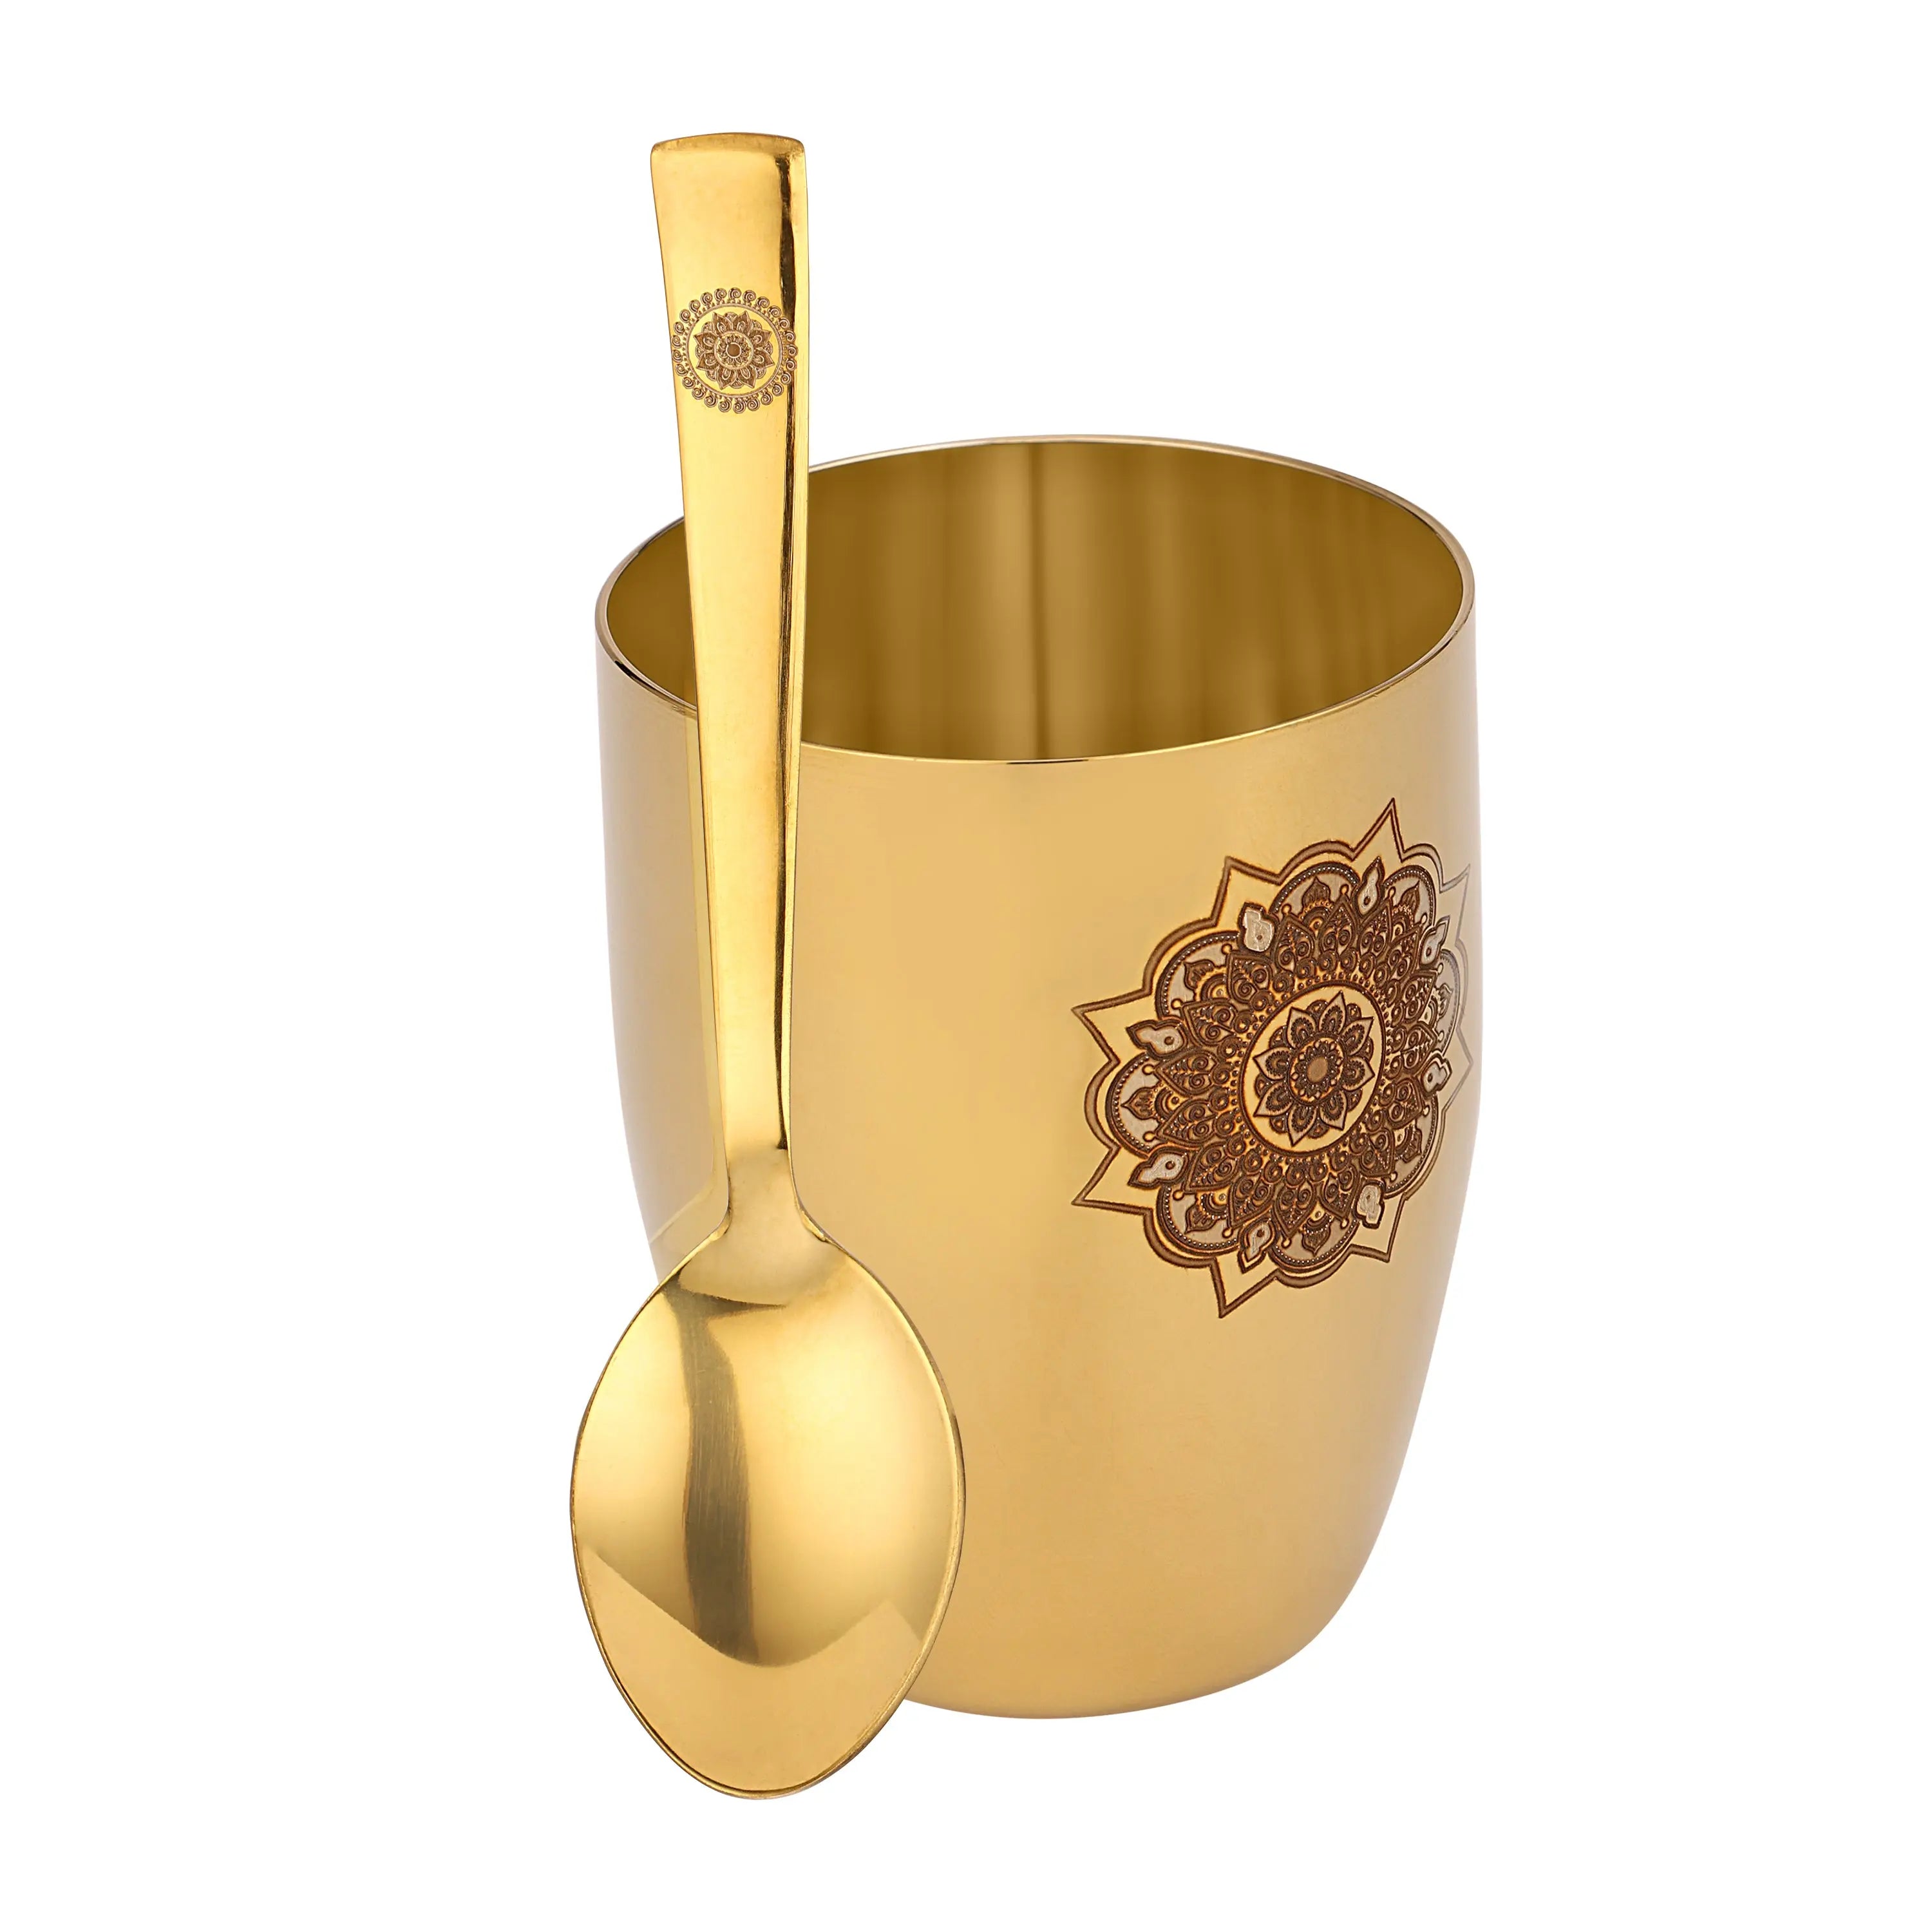 STAINLESS STEEL GOLD LASER BHOJAN THAL WITH GLASS AND SPOON - CROCKERY WALA AND COMPANY 